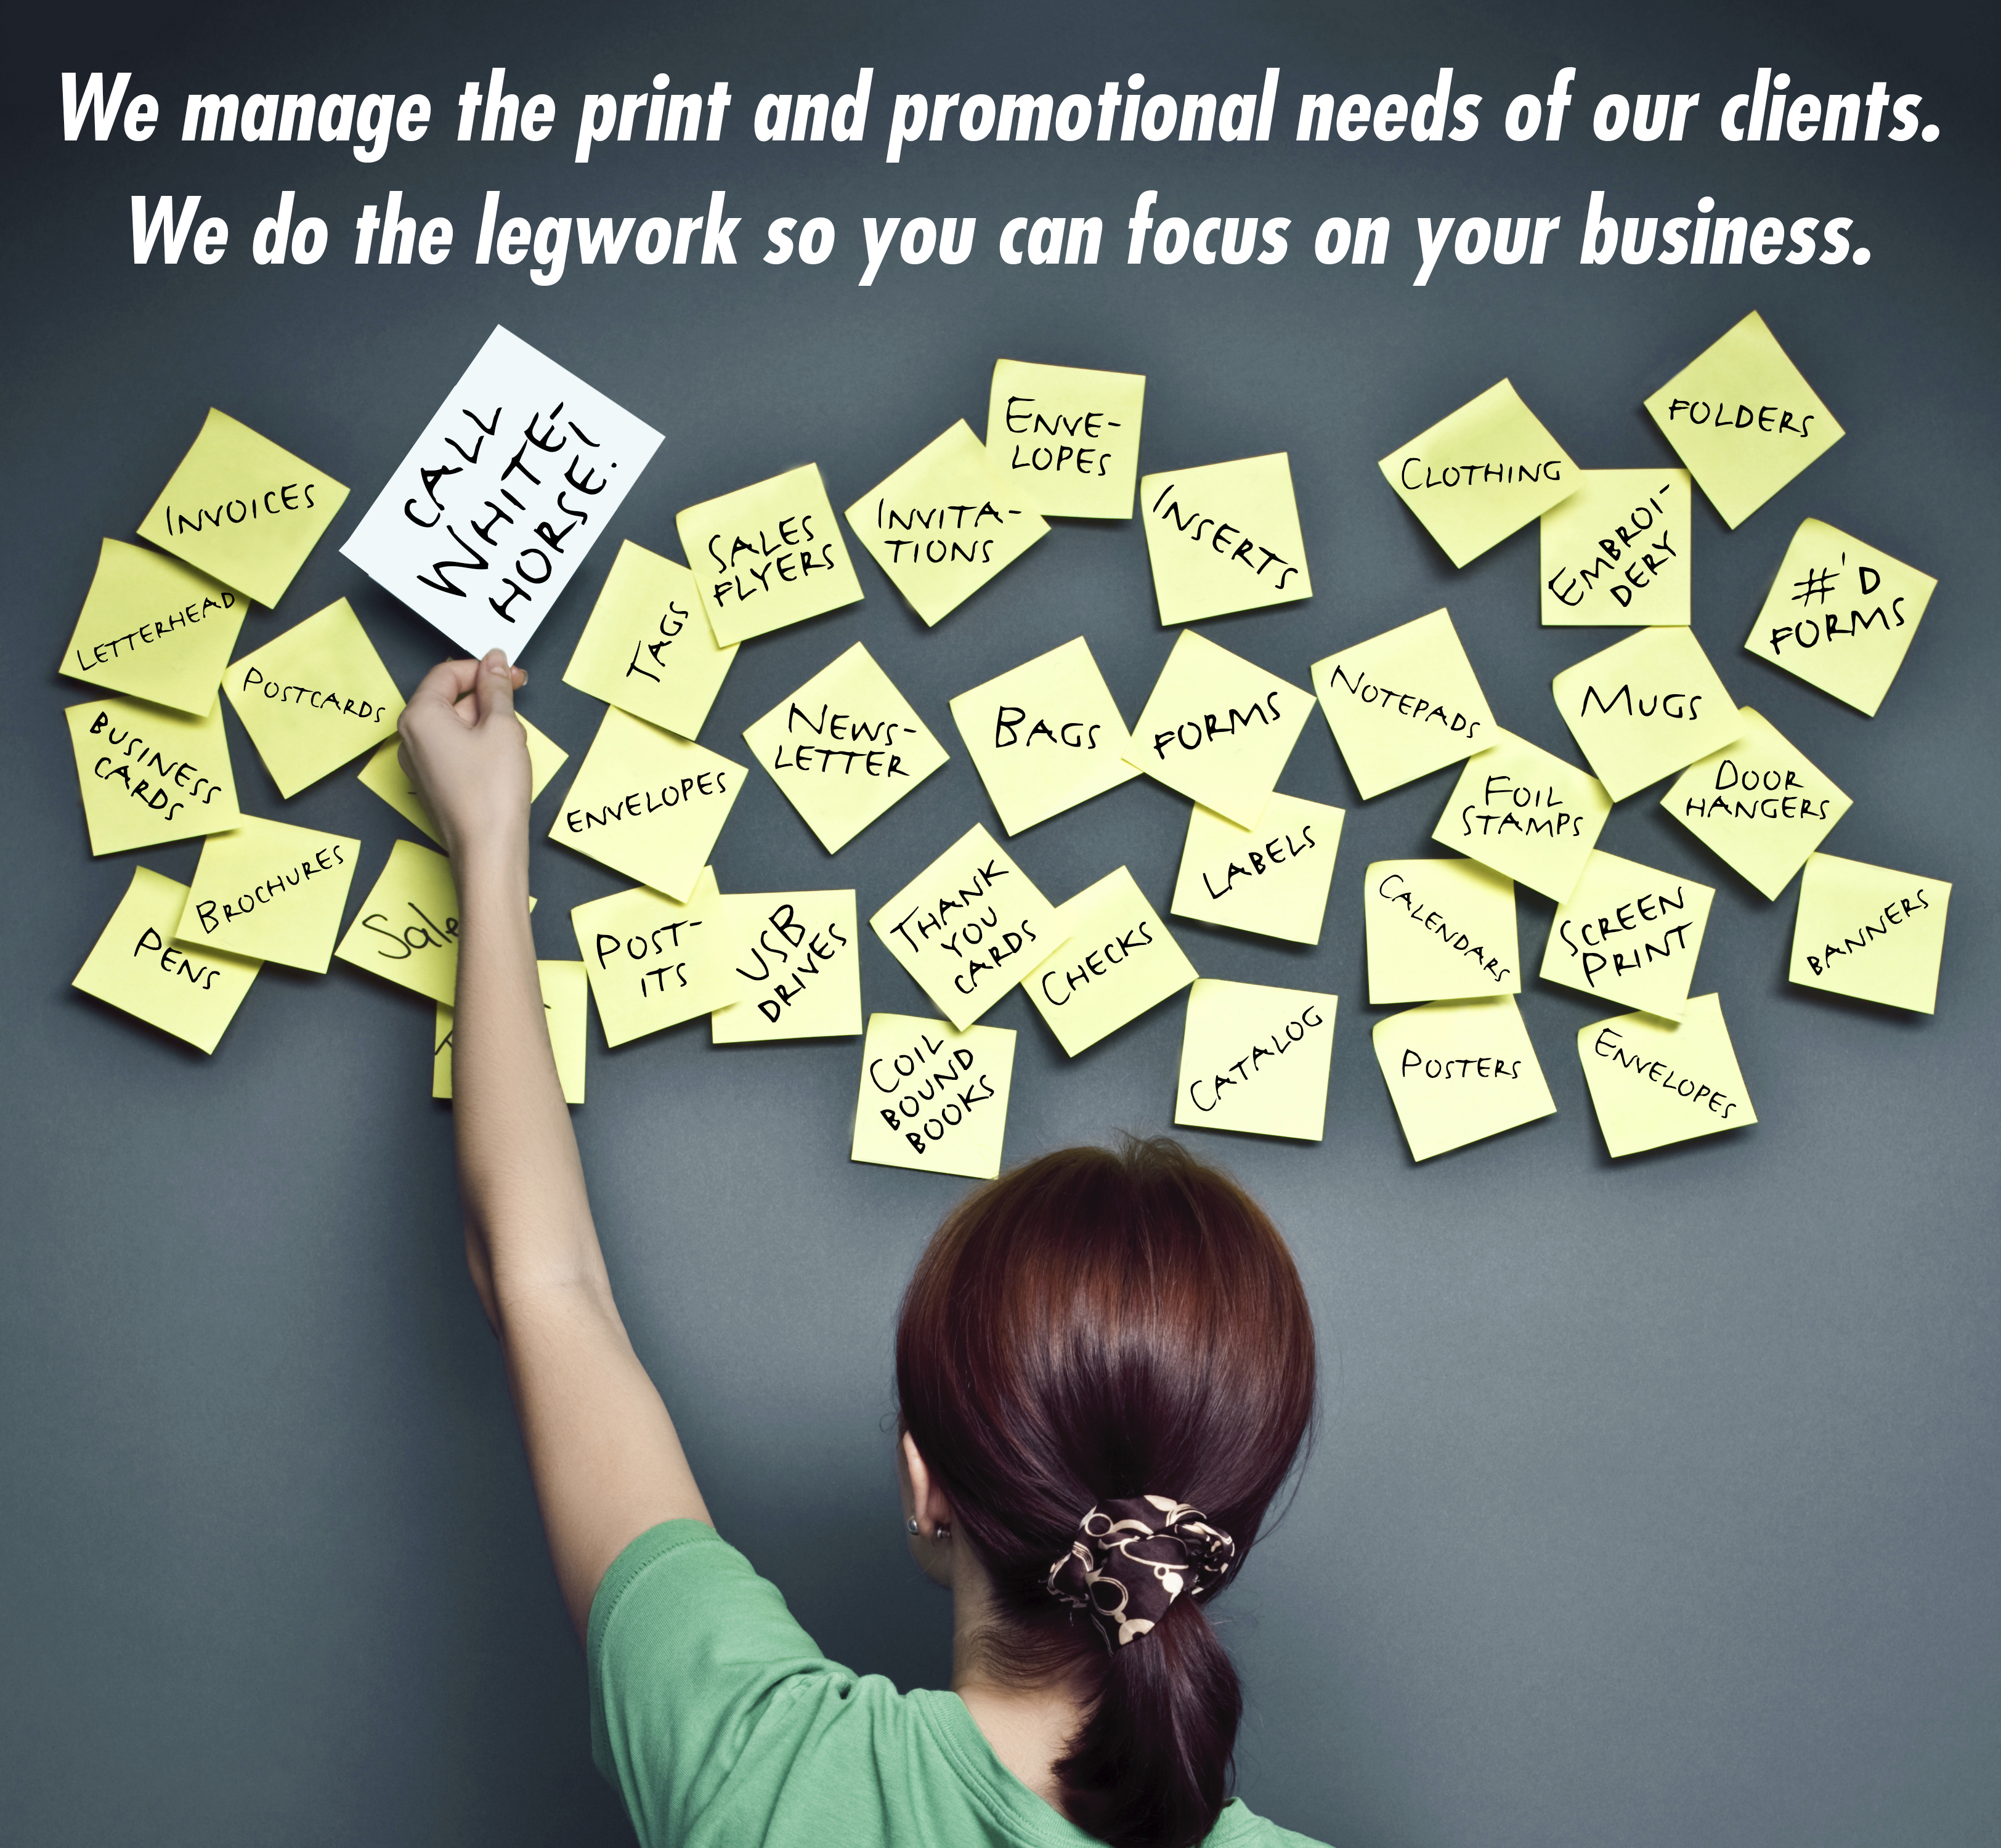 We manage the print & promotional needs of our clients. We do the legwork so you can focus on your business.